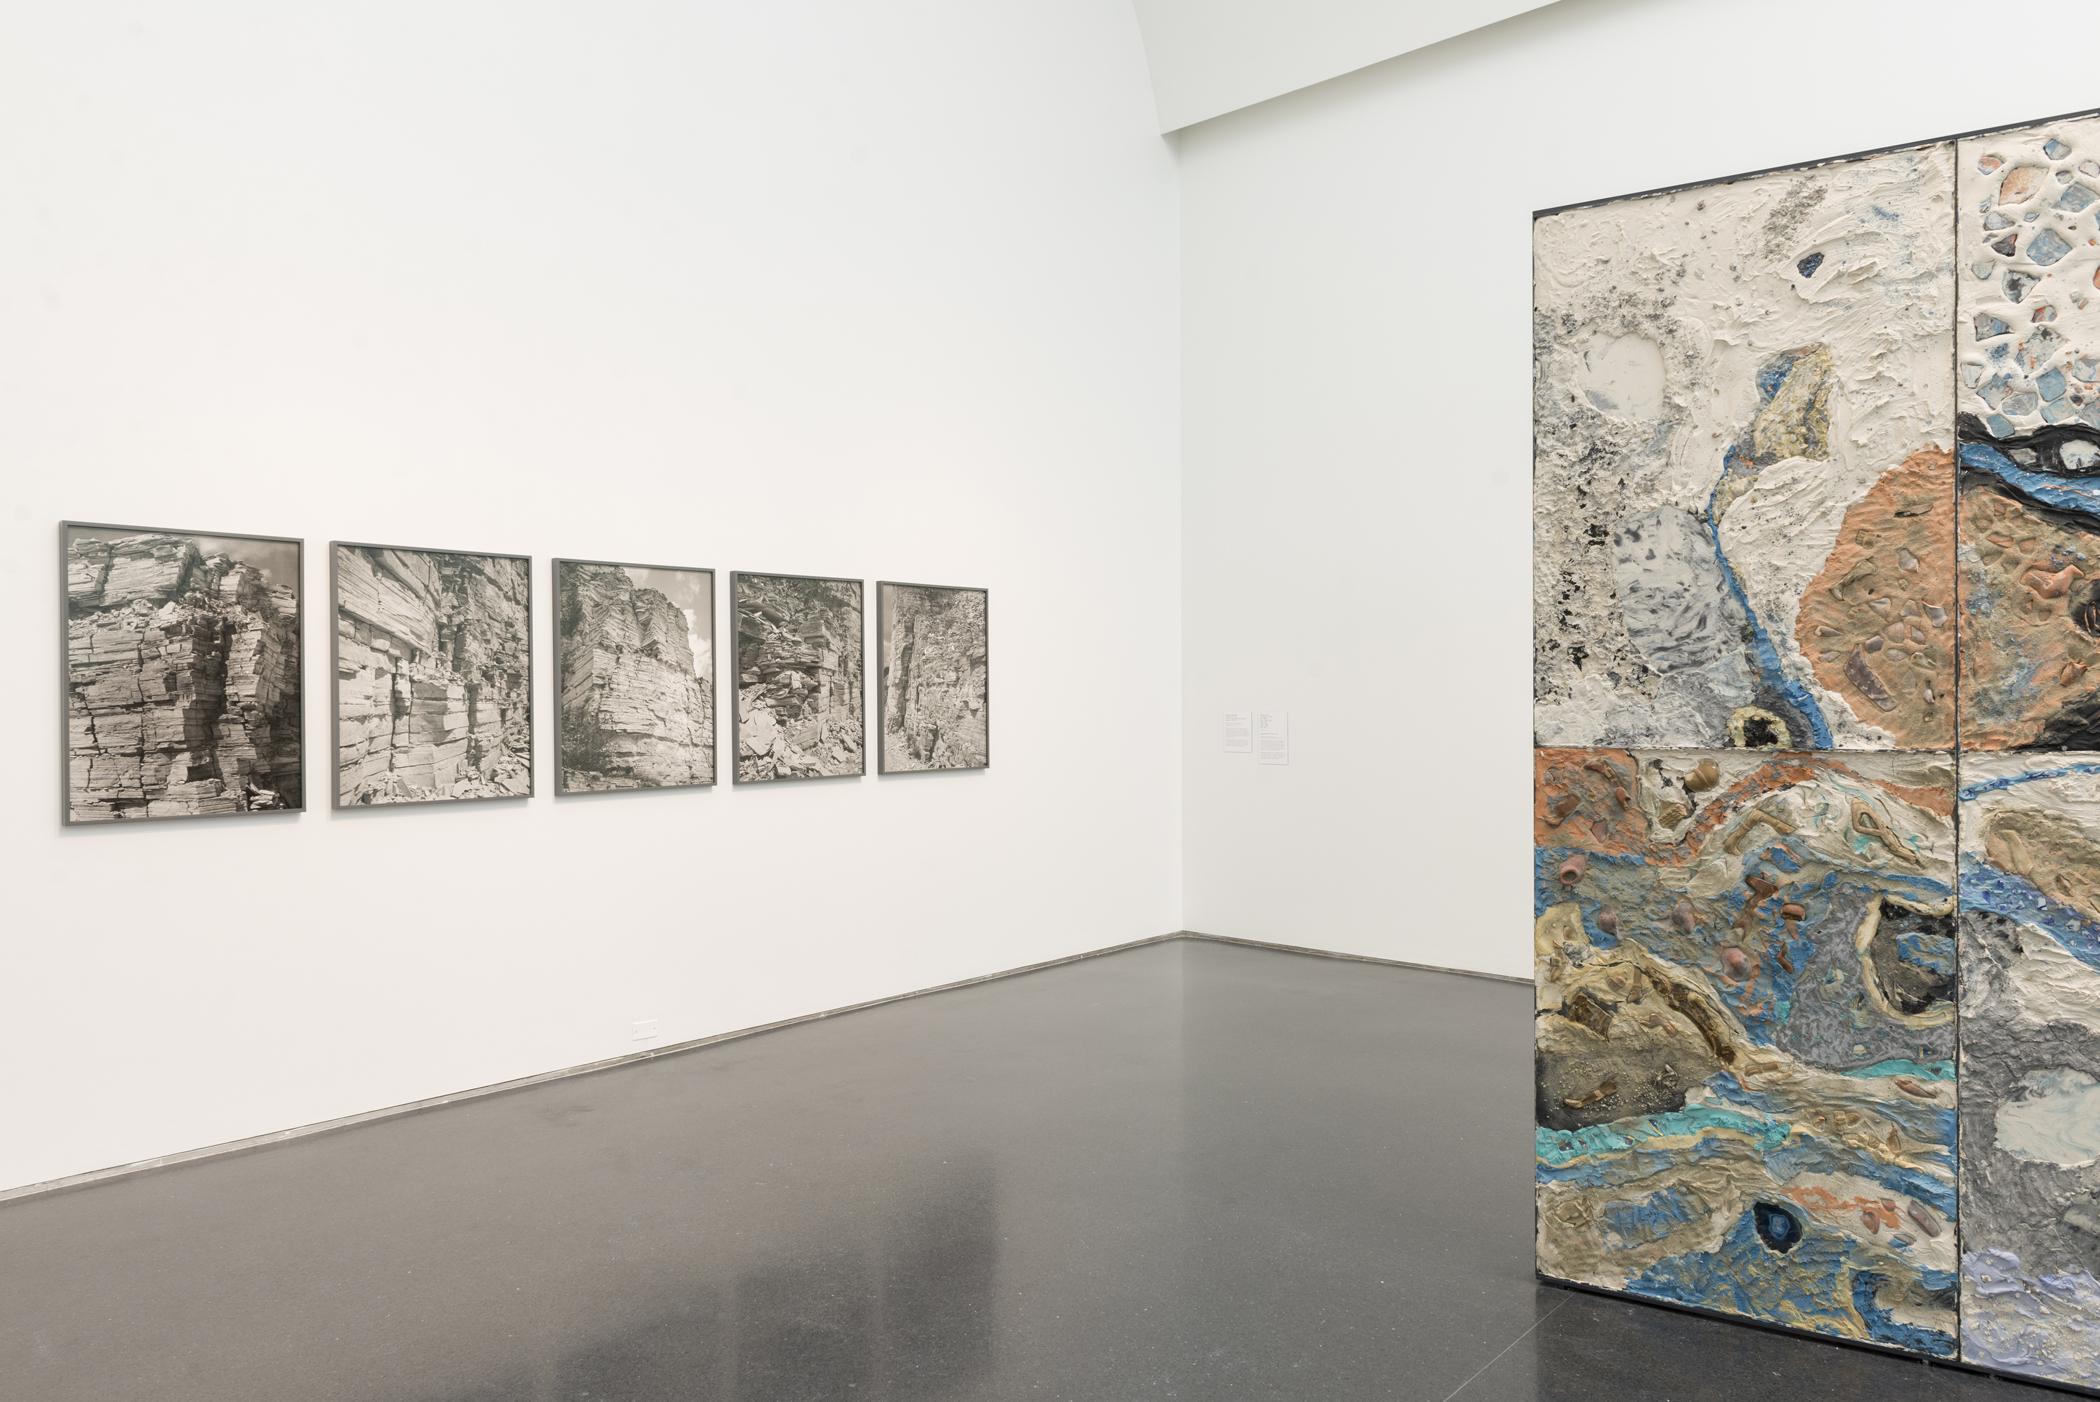 Four photographs are hung on a white wall to the left of a rectangular sculpture. The photographs are pictures of rock ledges in black and white. The rectangular sculpture is in blue and earth tones resembling the texture and look of a rock ledge.